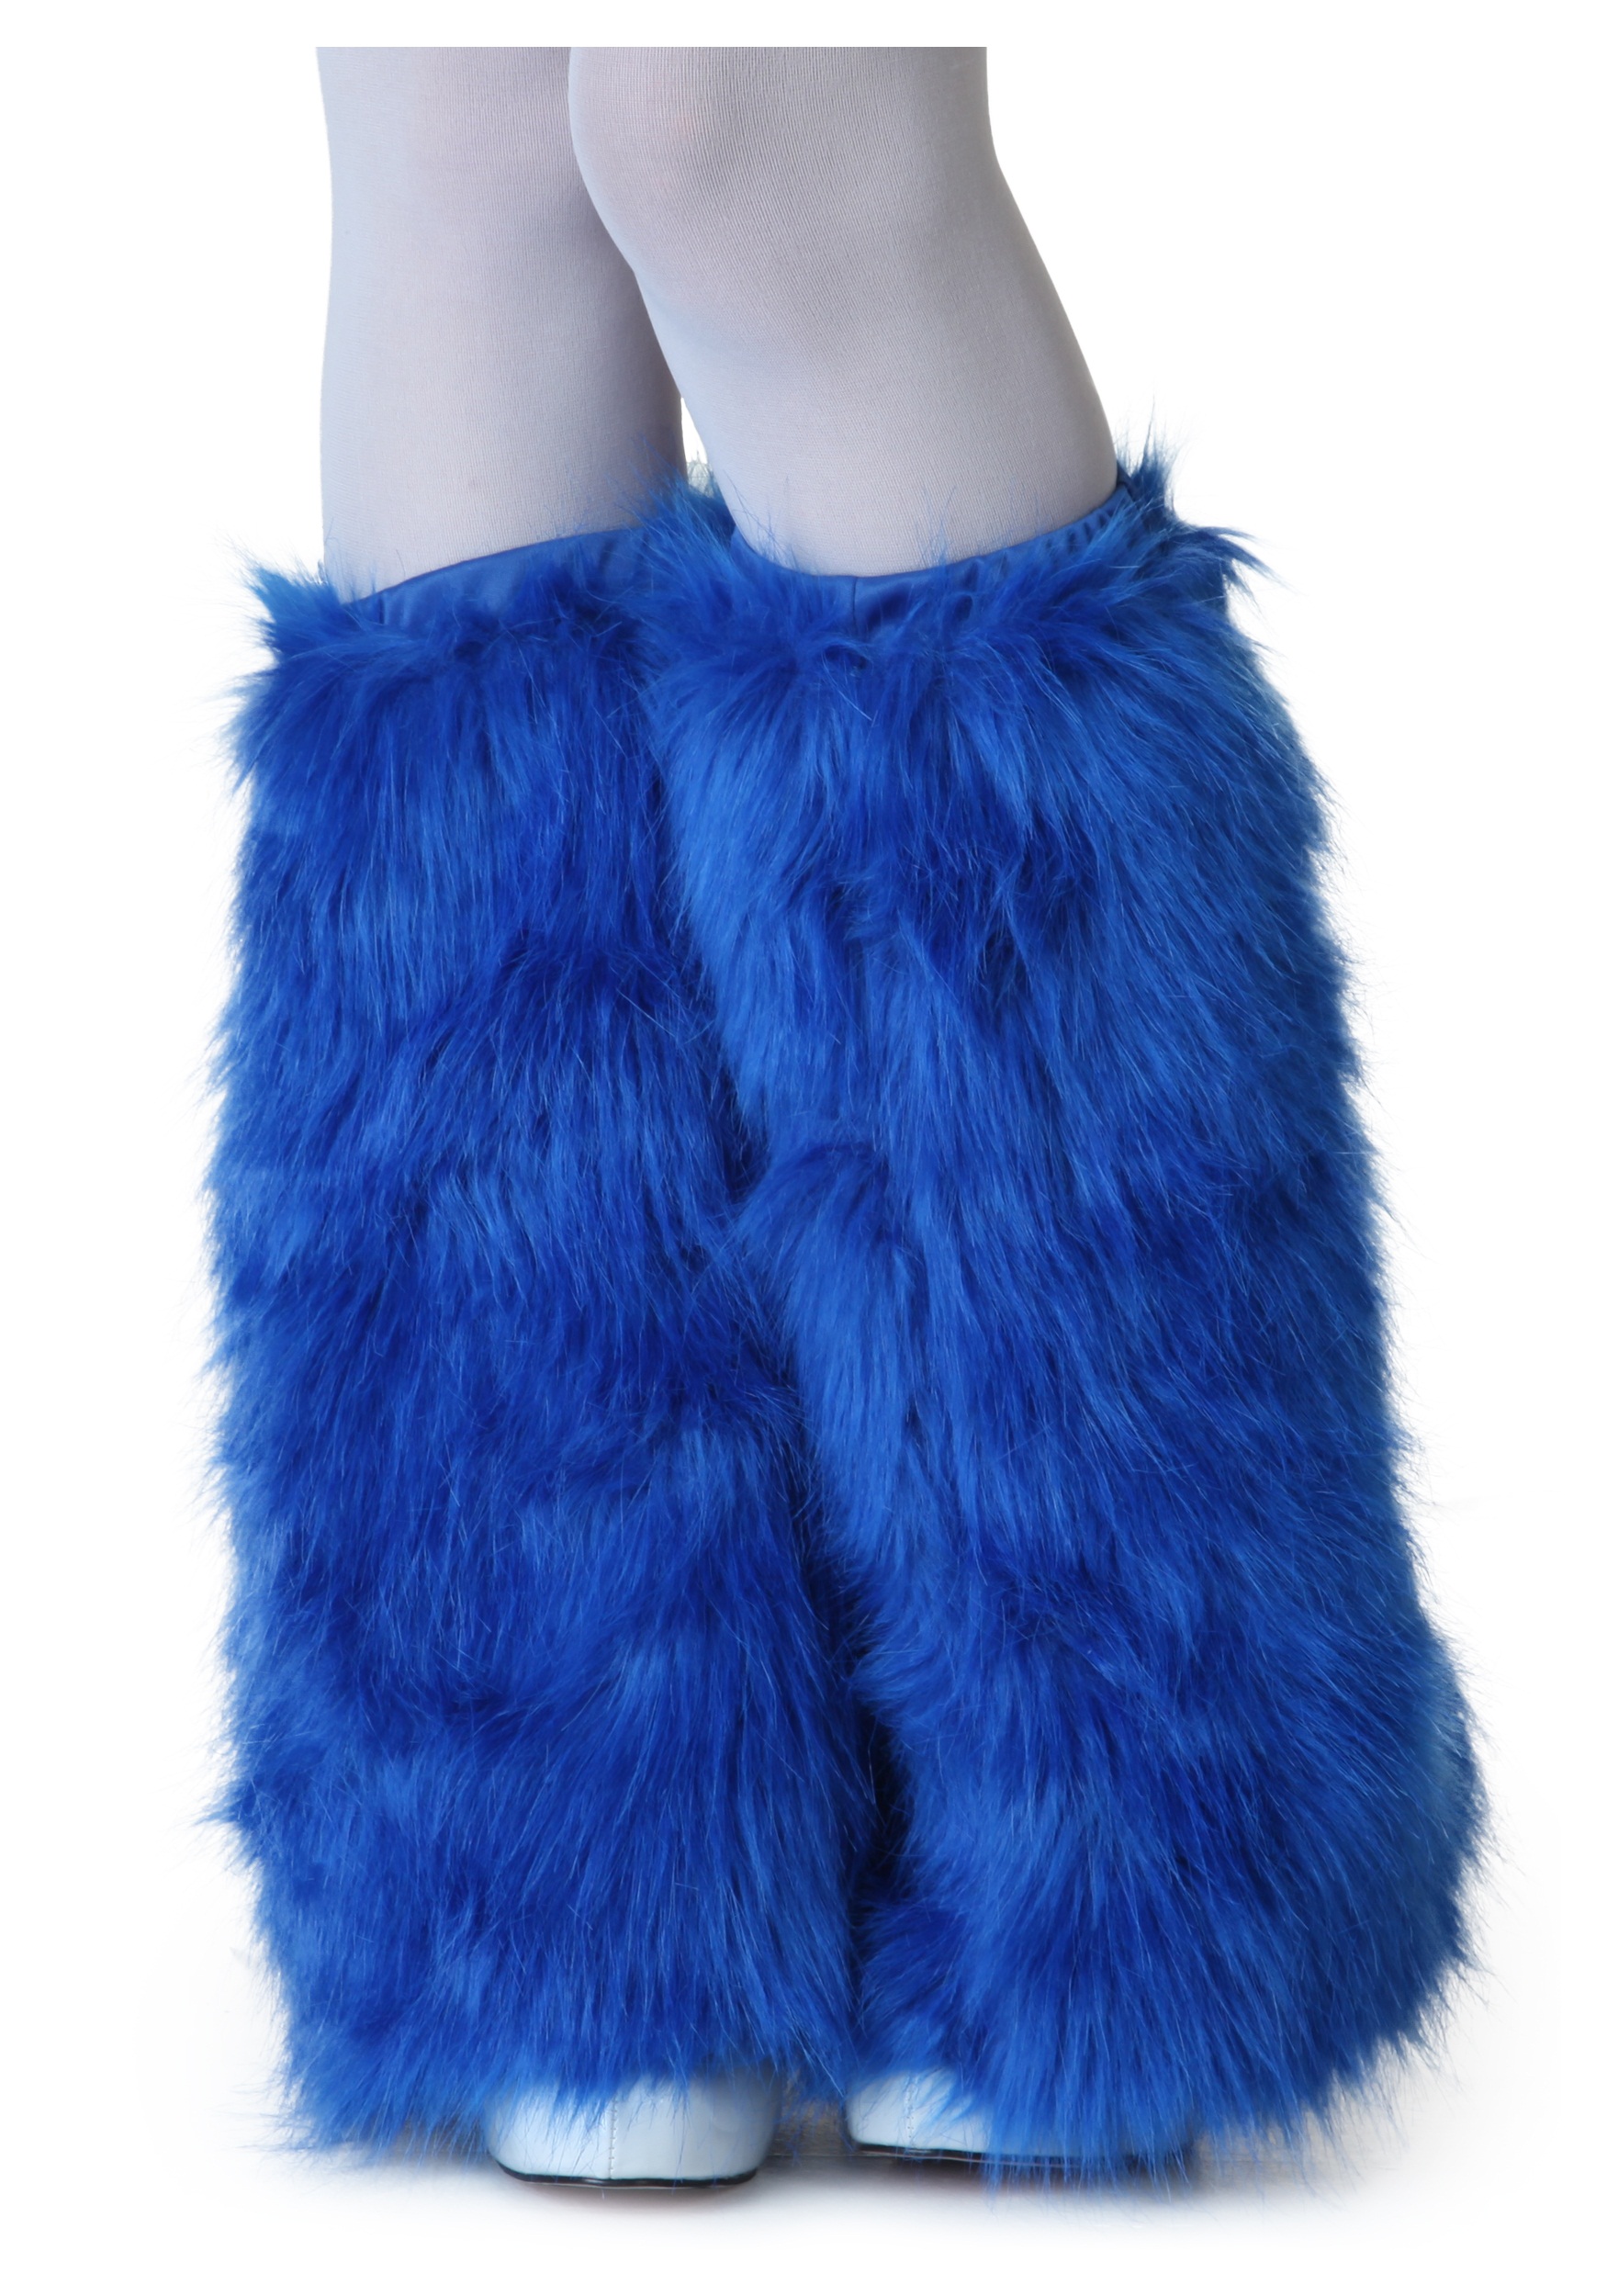 blue fluffy shoes